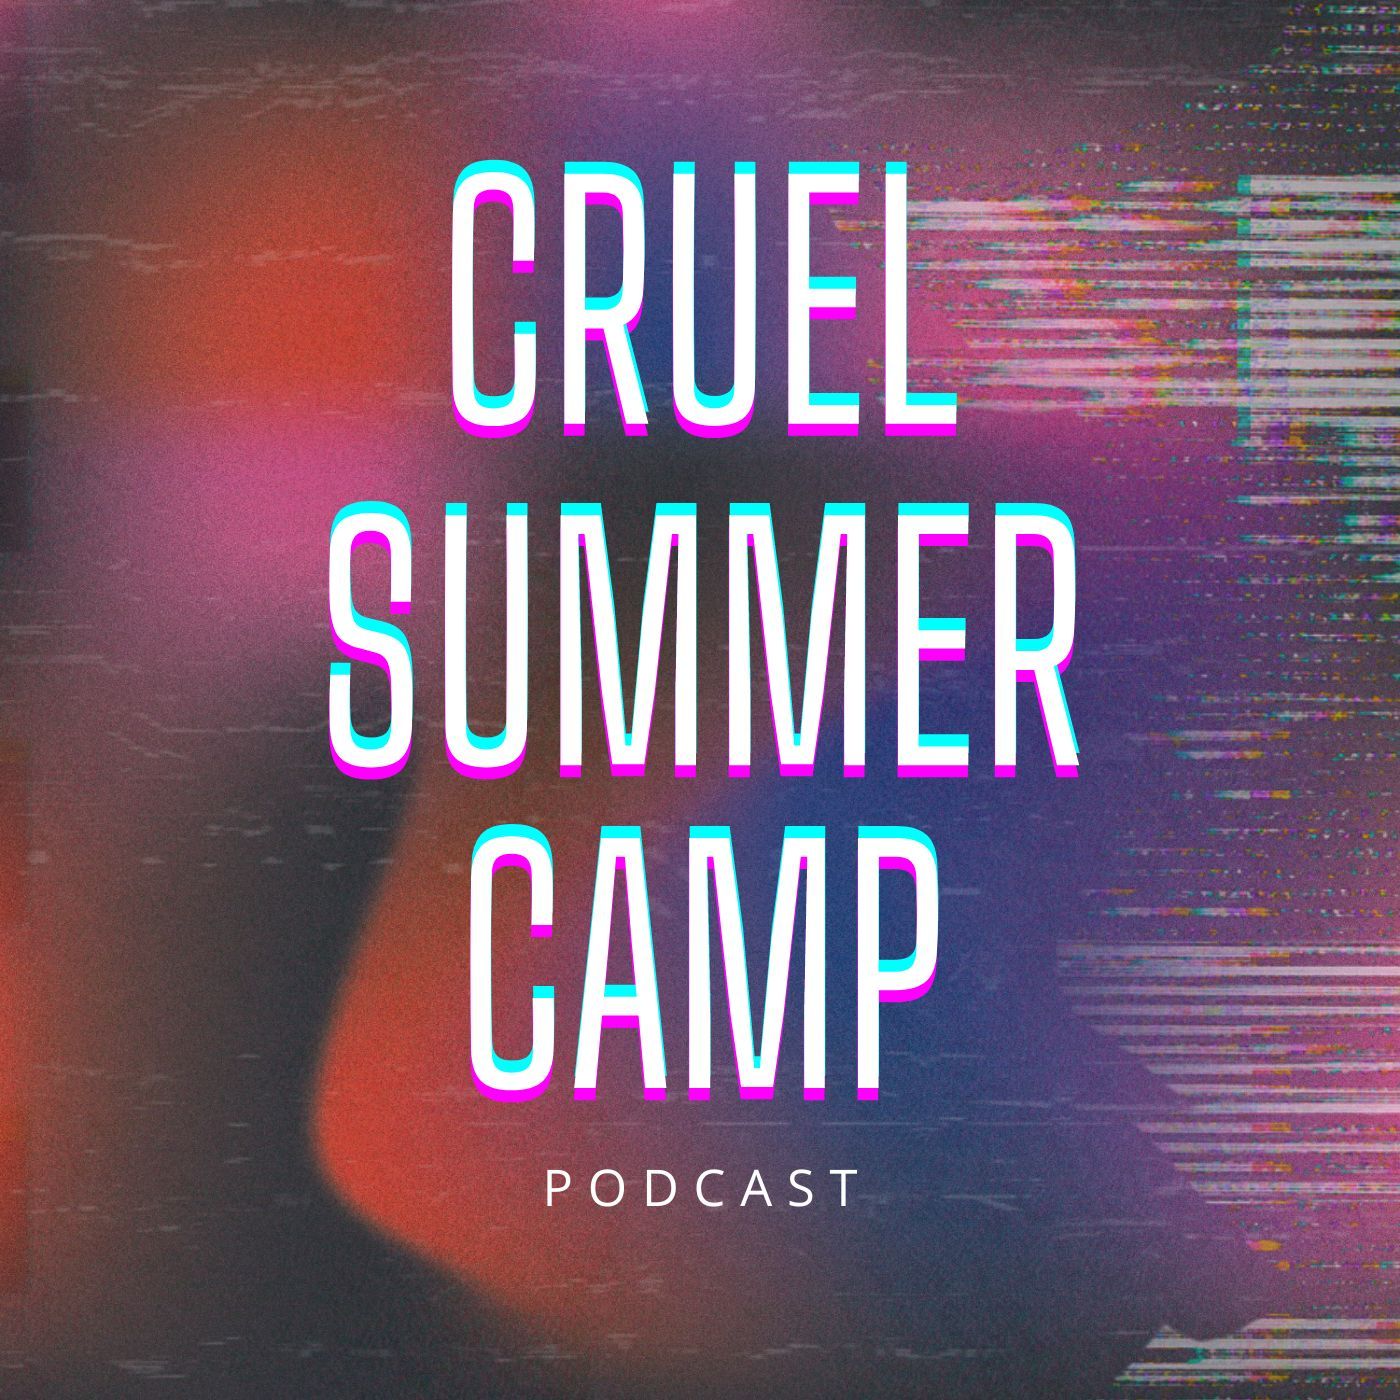 Cruel Summer Camp Podcast Premiere!! Welcome To Chatham